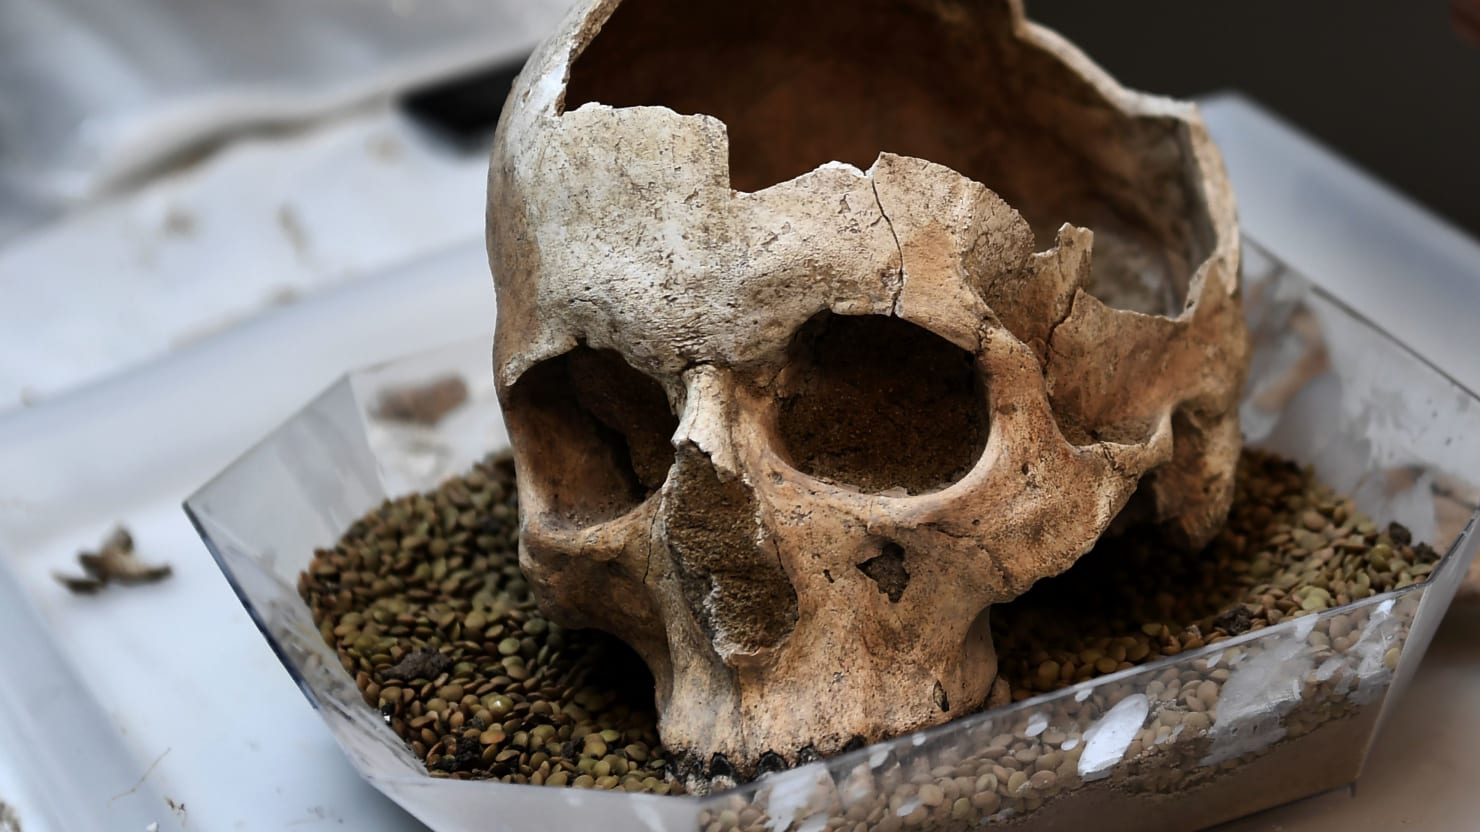 Broken Skull Found in Greece Is ‘Oldest Human Fossil’ Outside of Africa